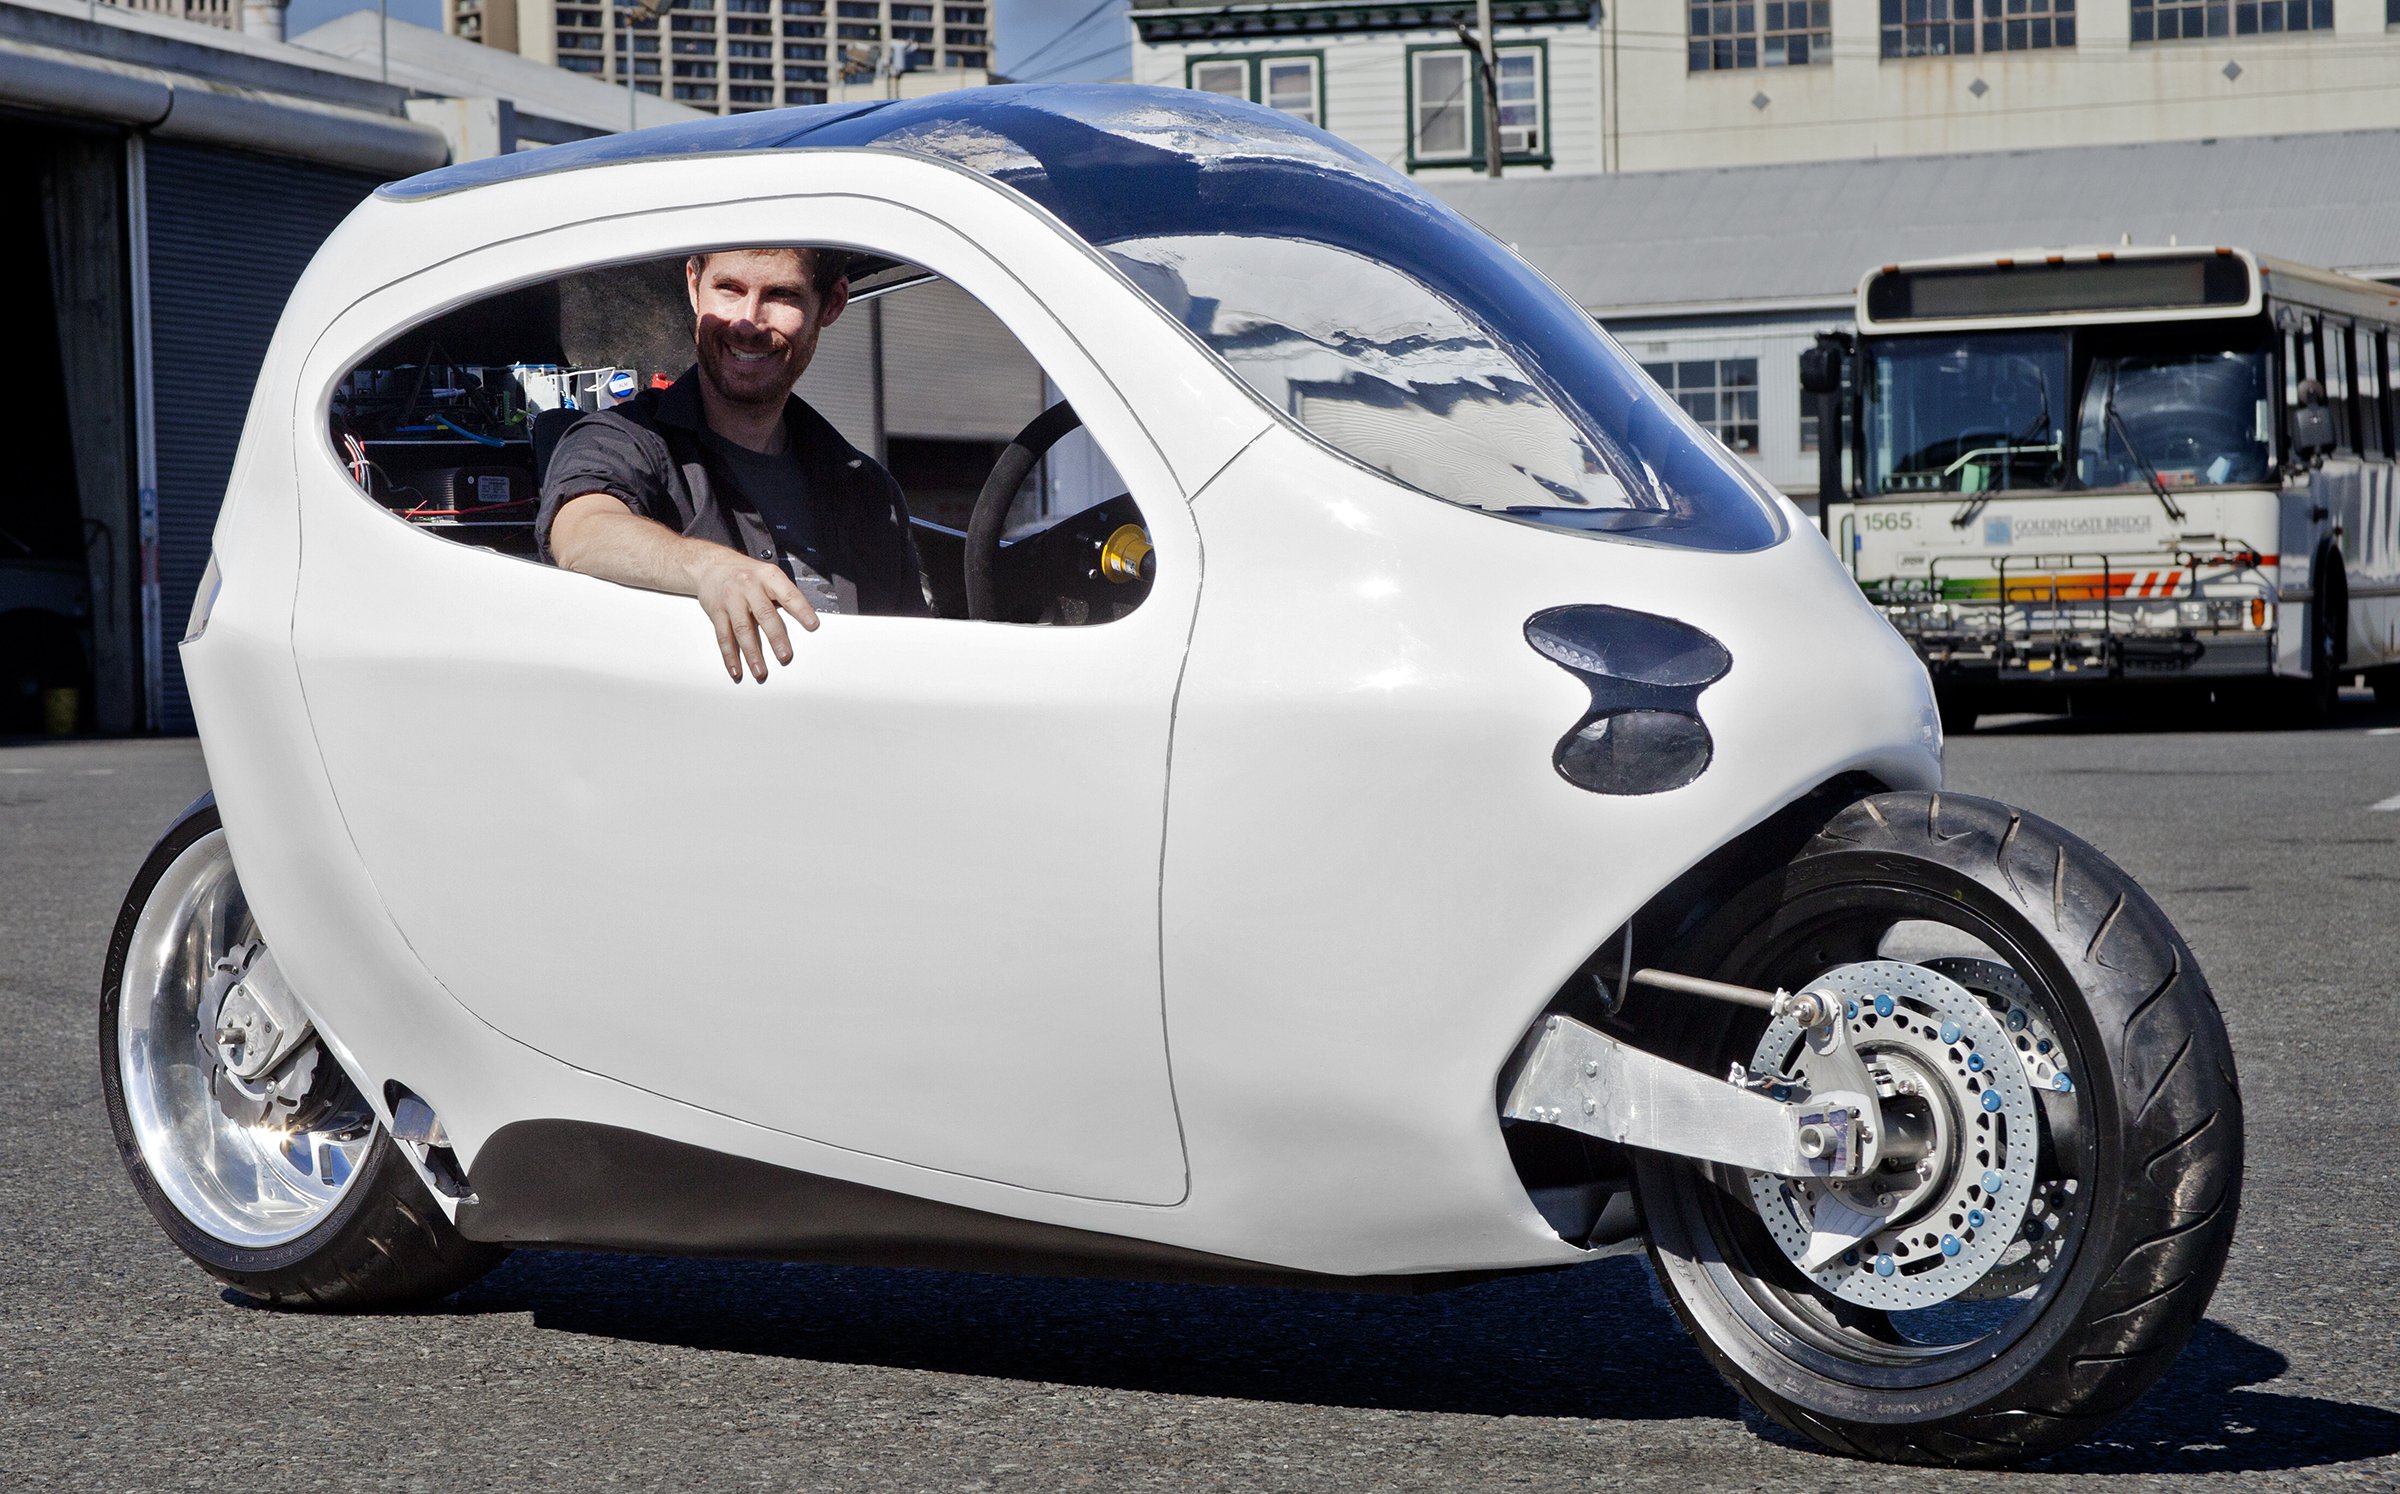 Apple is Reportedly in Talks to Acquire Motorcycle Startup Lit Motors